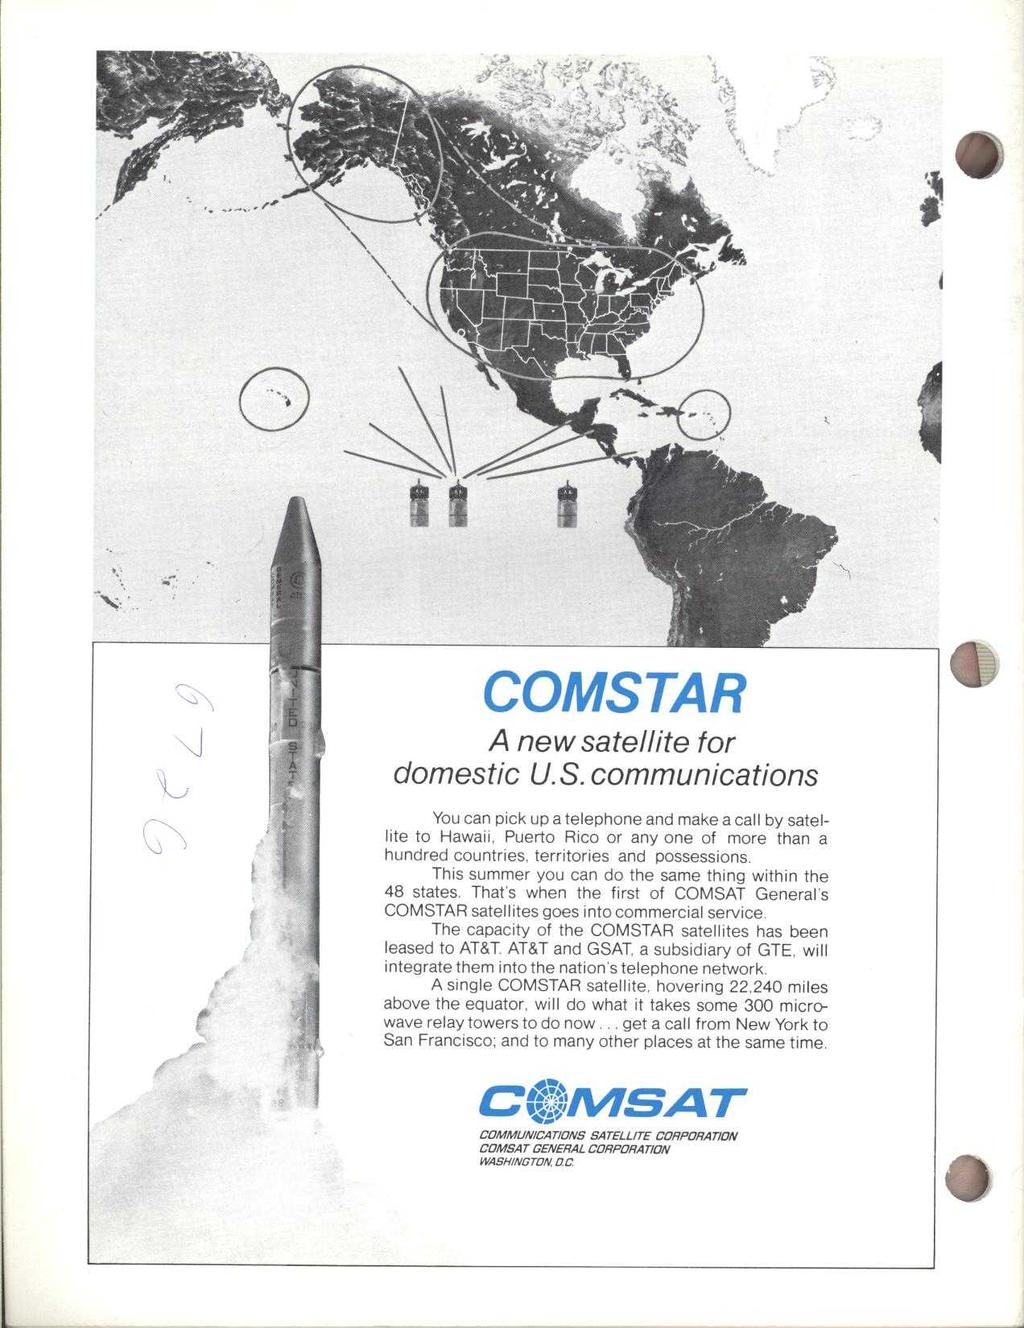 LI -, i N t A I COMSTAR A new satellite for domestic U. S. communications You can pick up a telephone and make a call by satellite to Hawaii, Puerto Rico or any one of more than a hundred countries.